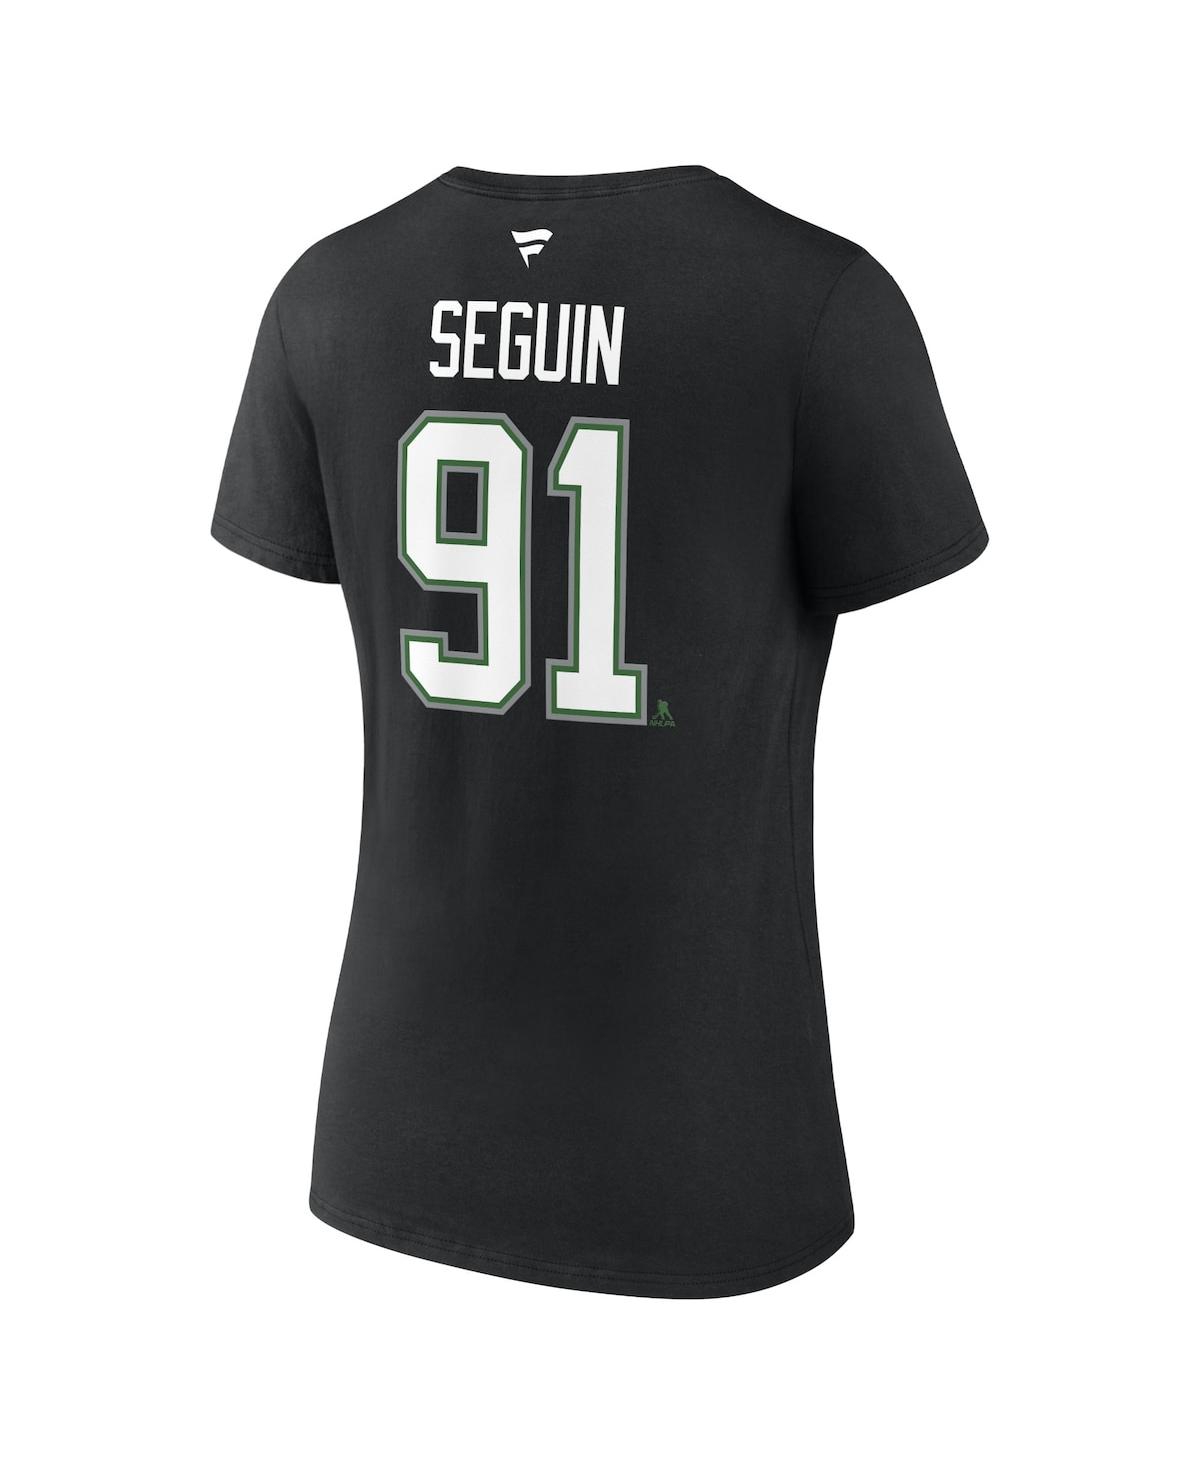 Shop Fanatics Women's  Tyler Seguin Black Dallas Stars Special Edition 2.0 Name And Number V-neck T-shirt